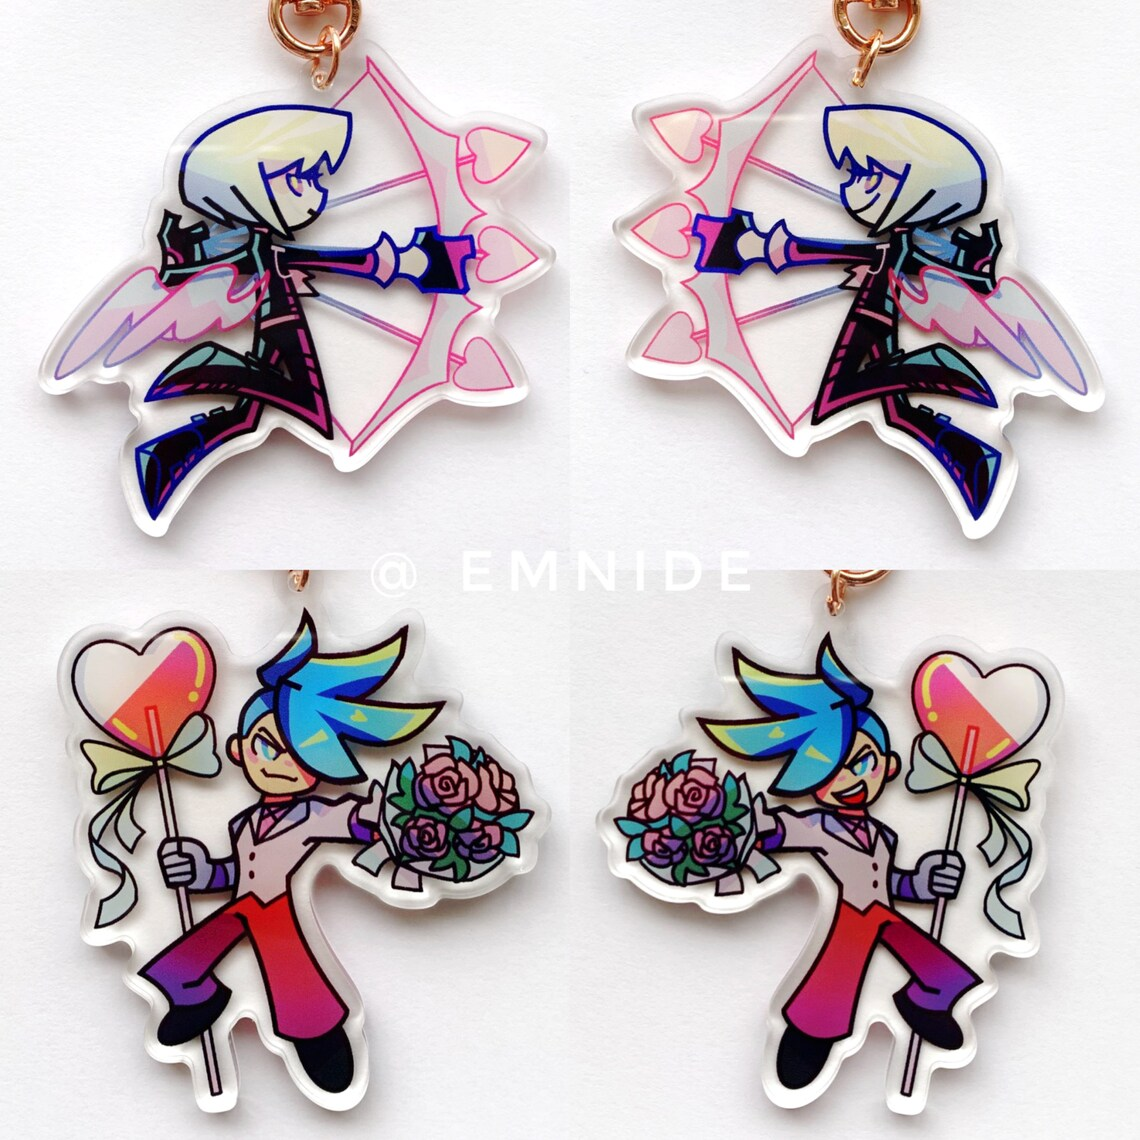 Promare Sweetheart Charms ✧ Studio Trigger